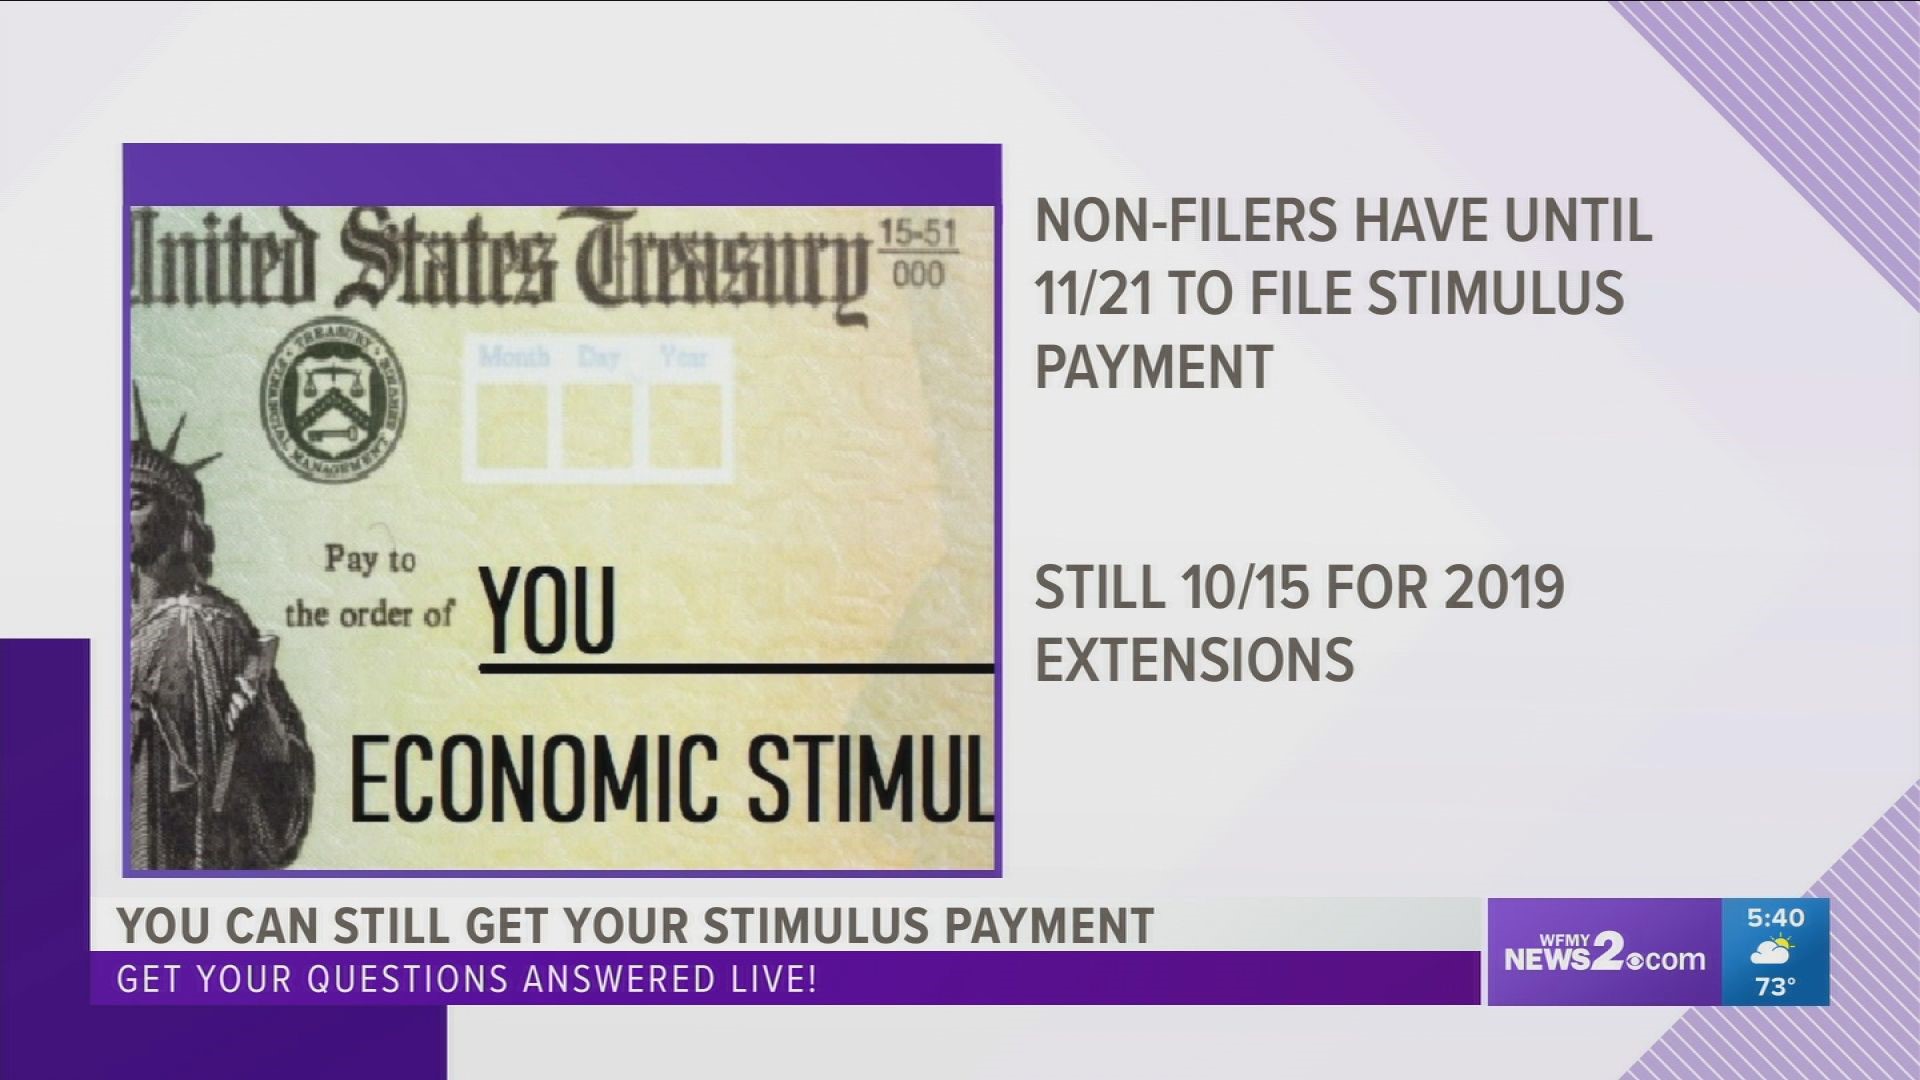 If you never got your stimulus payment you need to watch this to find out how to get it.